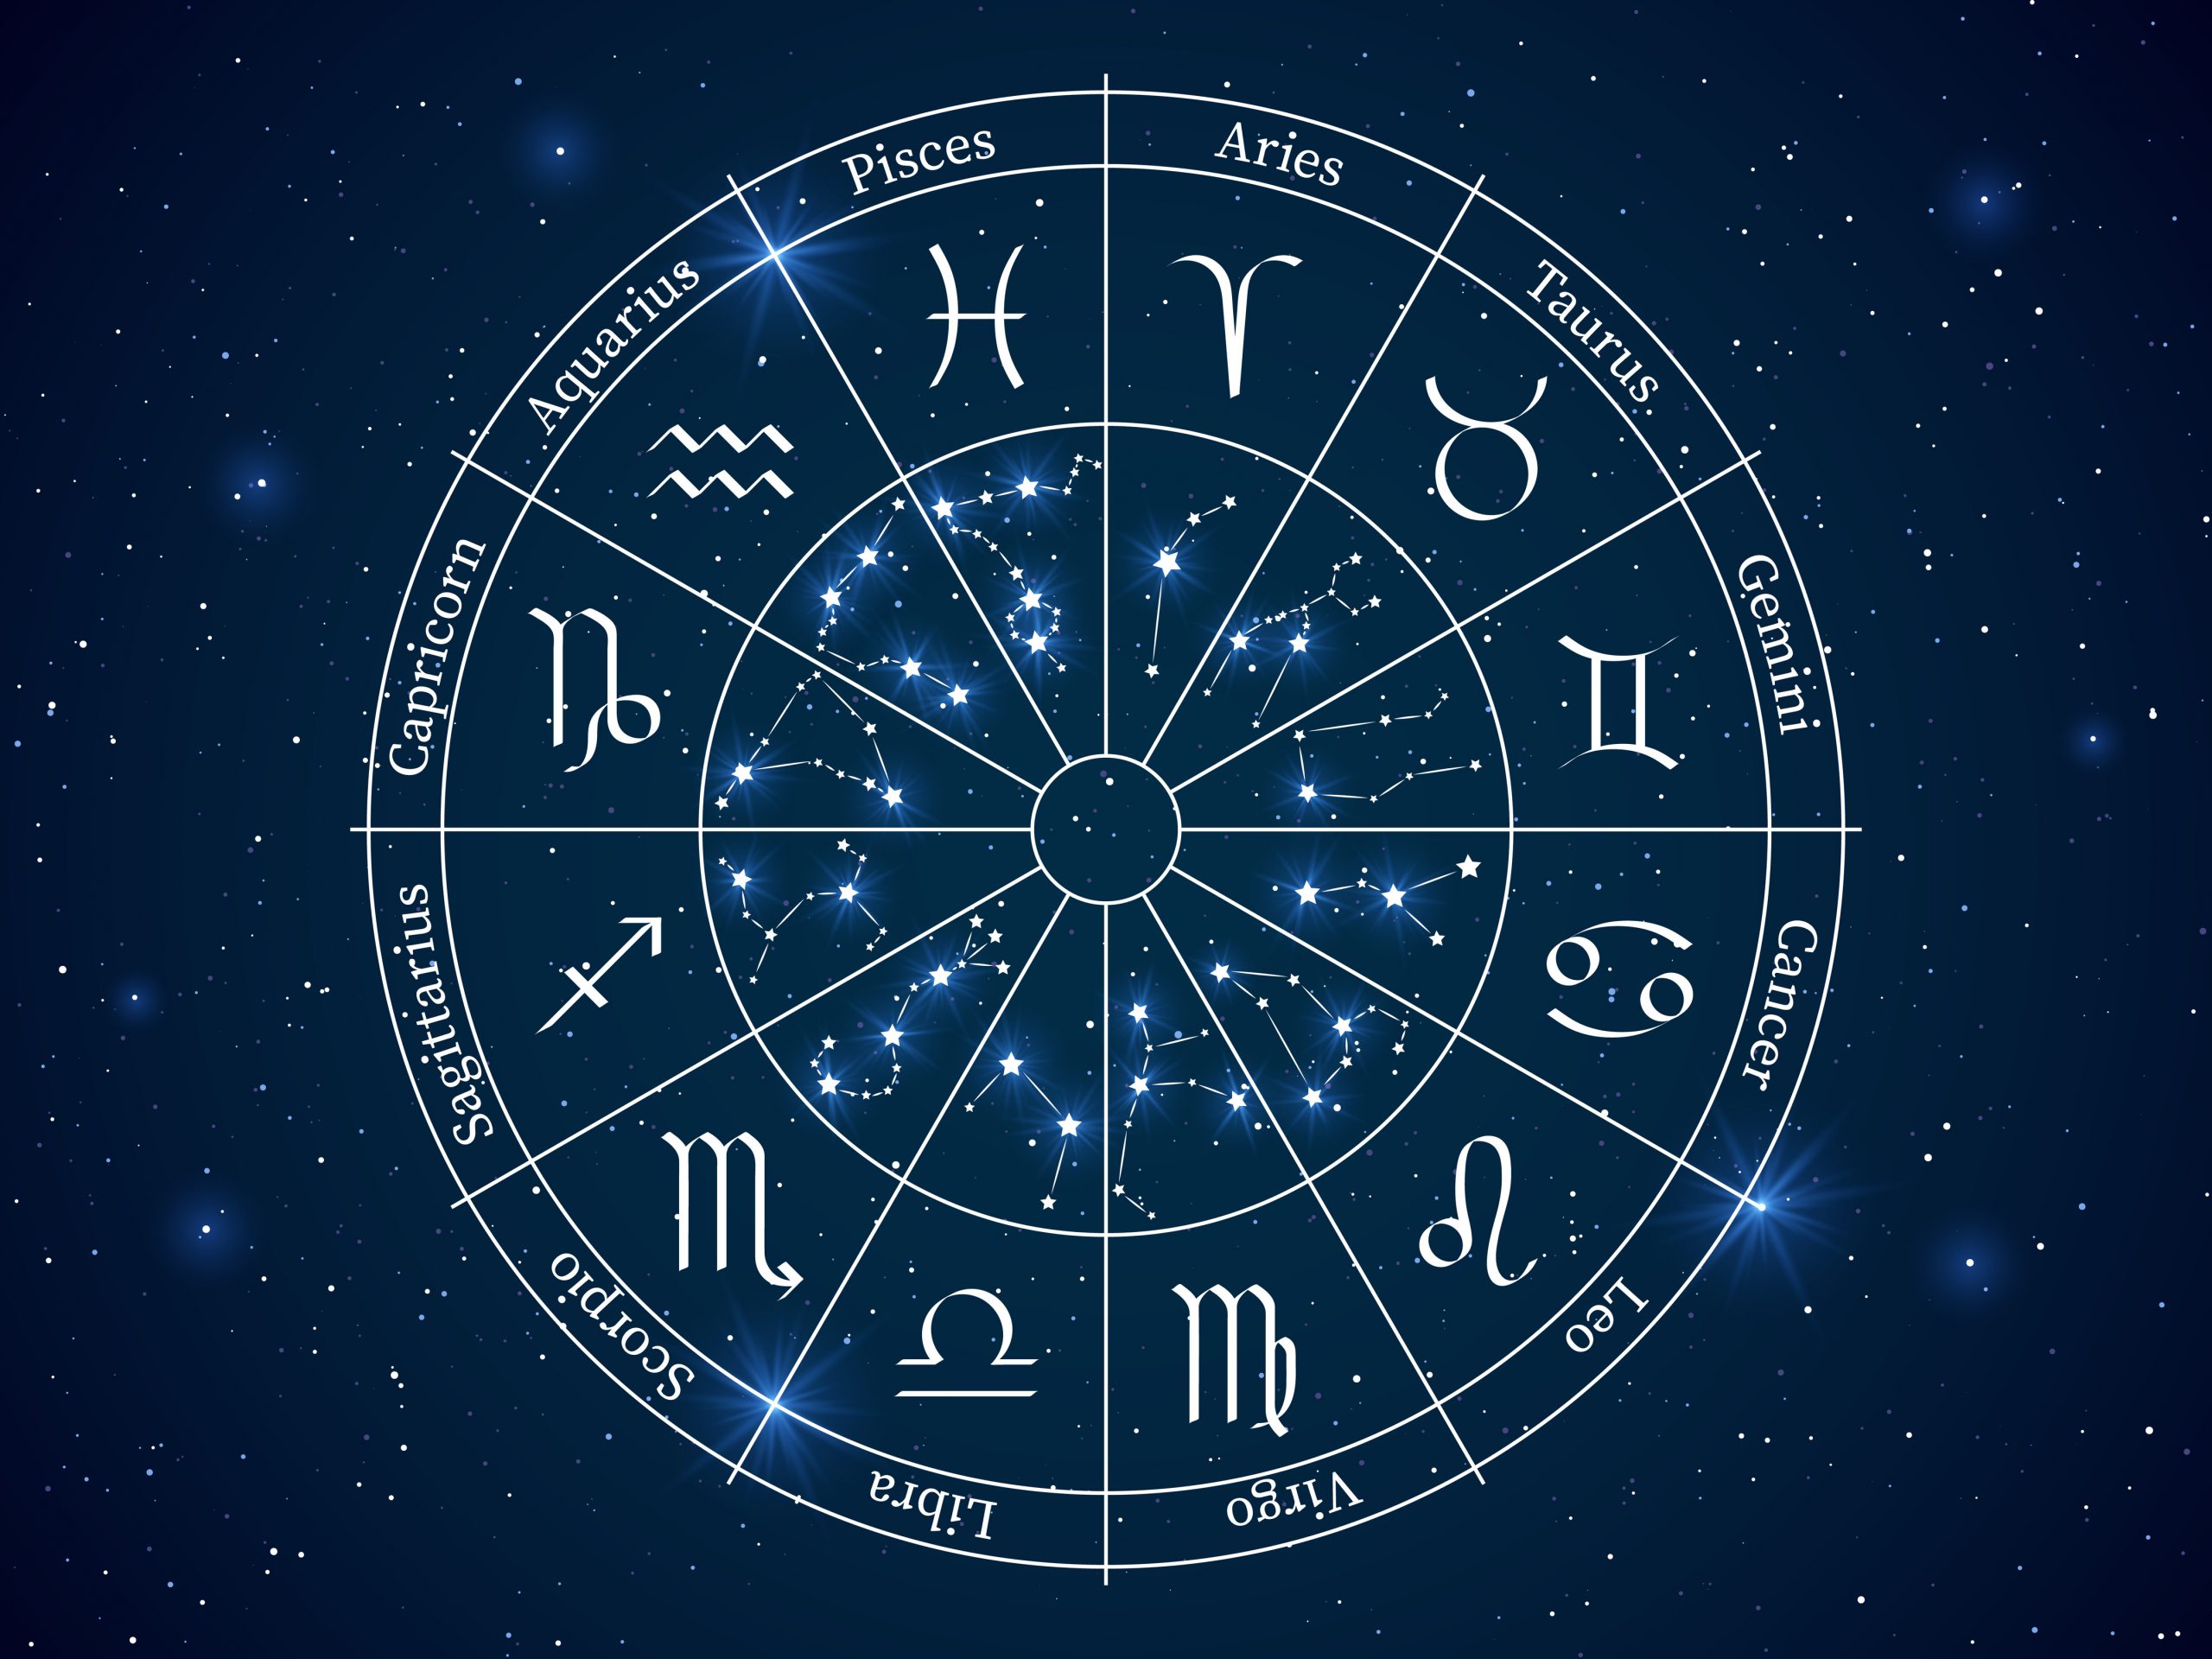 Astrology horoscope circle. Wheel with zodiac signs, constellations horoscope with titles, geometric representation space stars vector zodiacal symbols concept